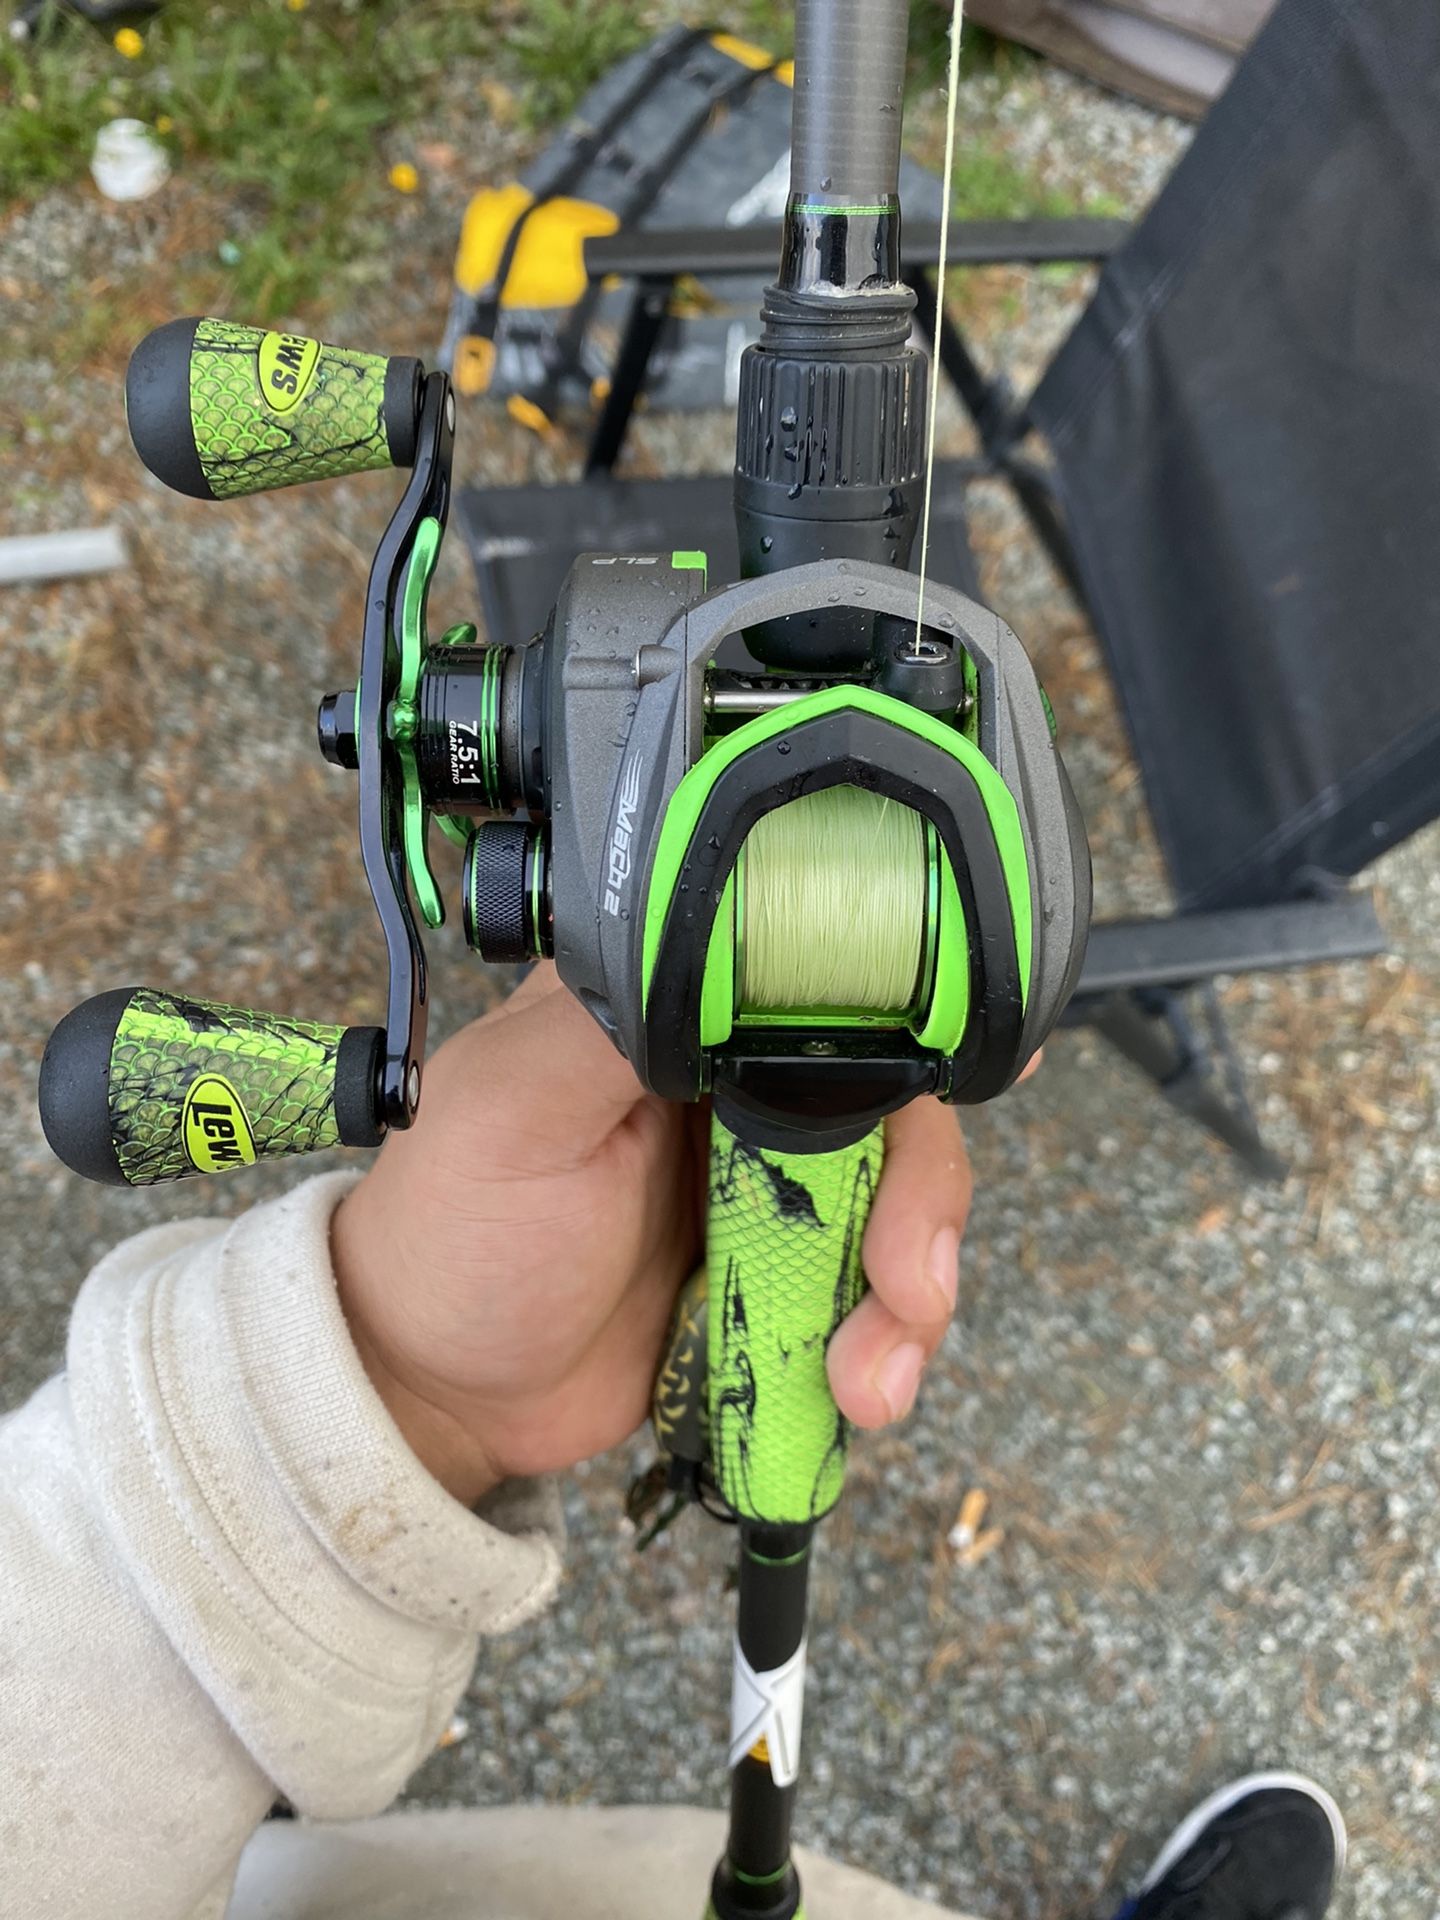 Lews Mach 2 Combo for Sale in Mount Vernon, WA - OfferUp